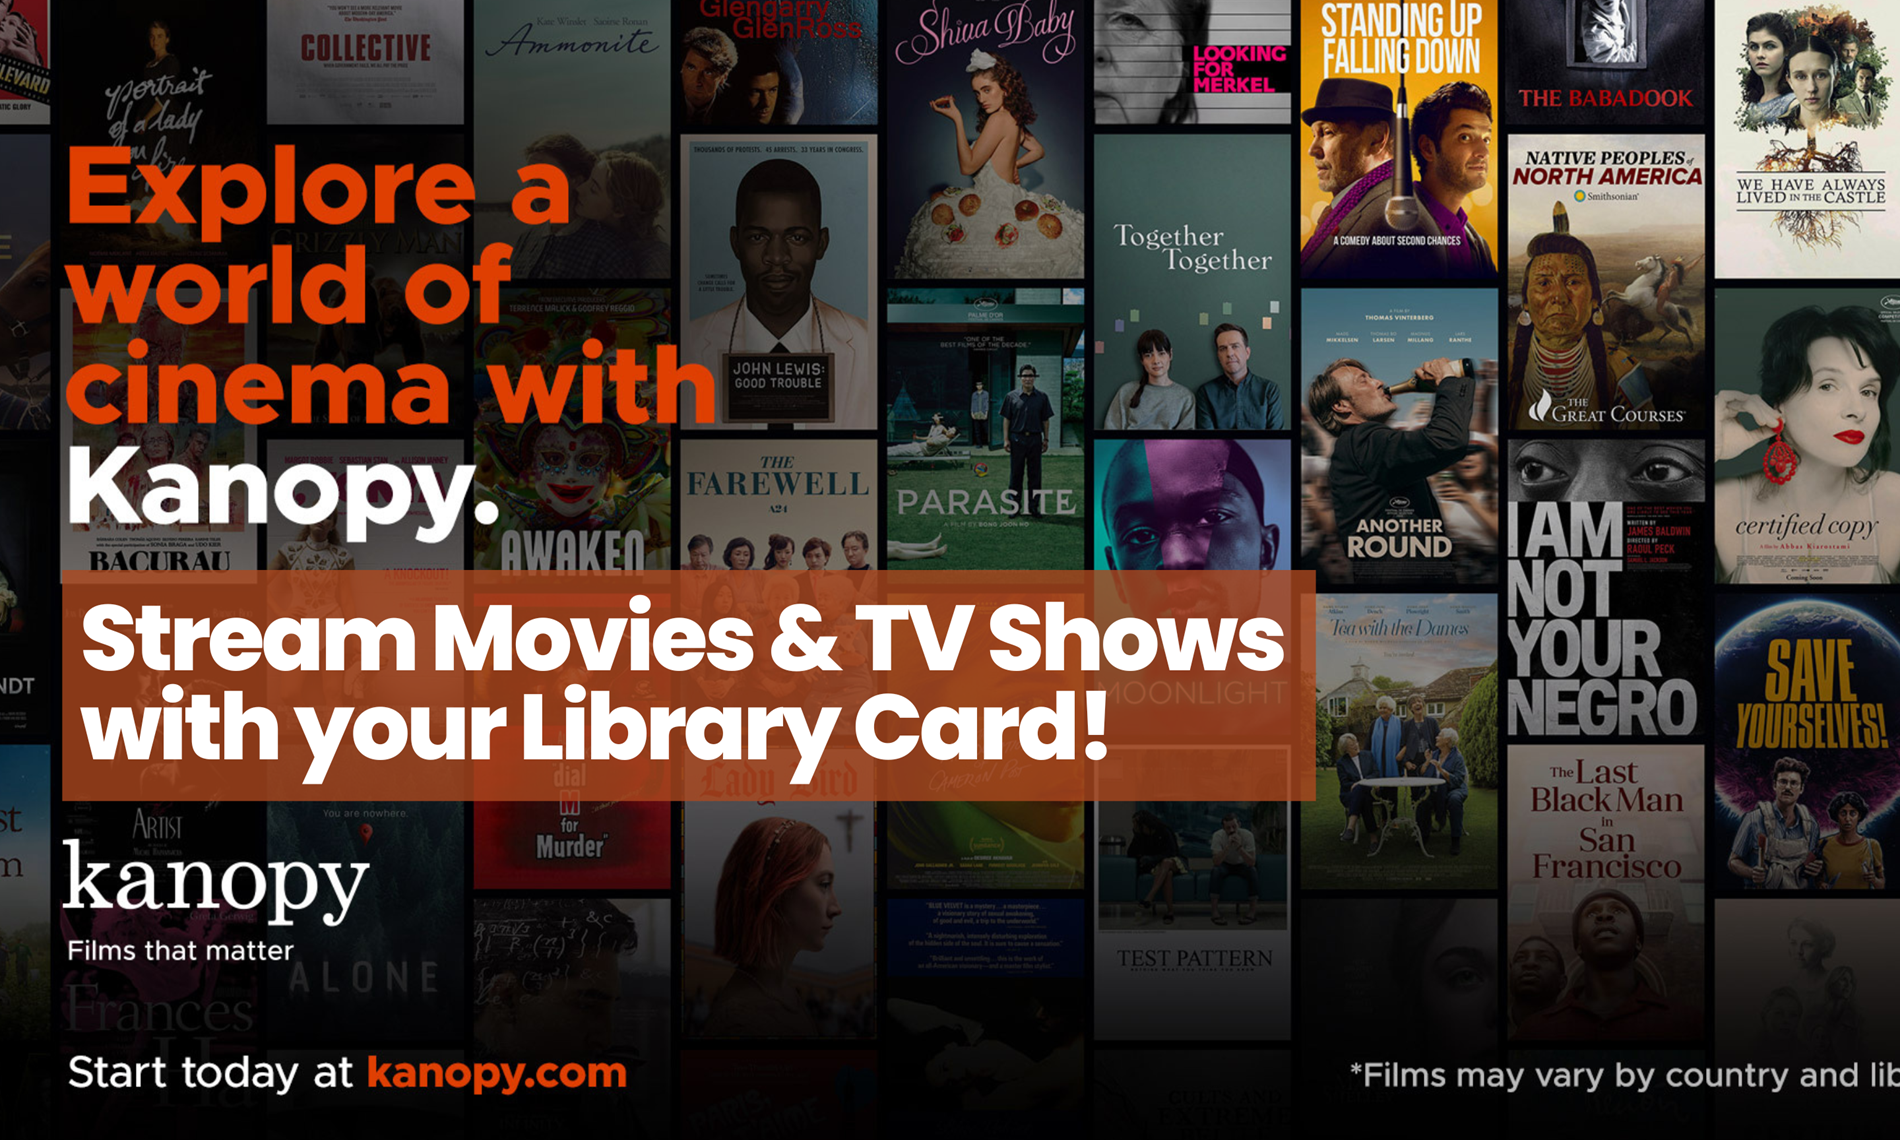 Stream movies and TV shows with your library card using Kanopy!